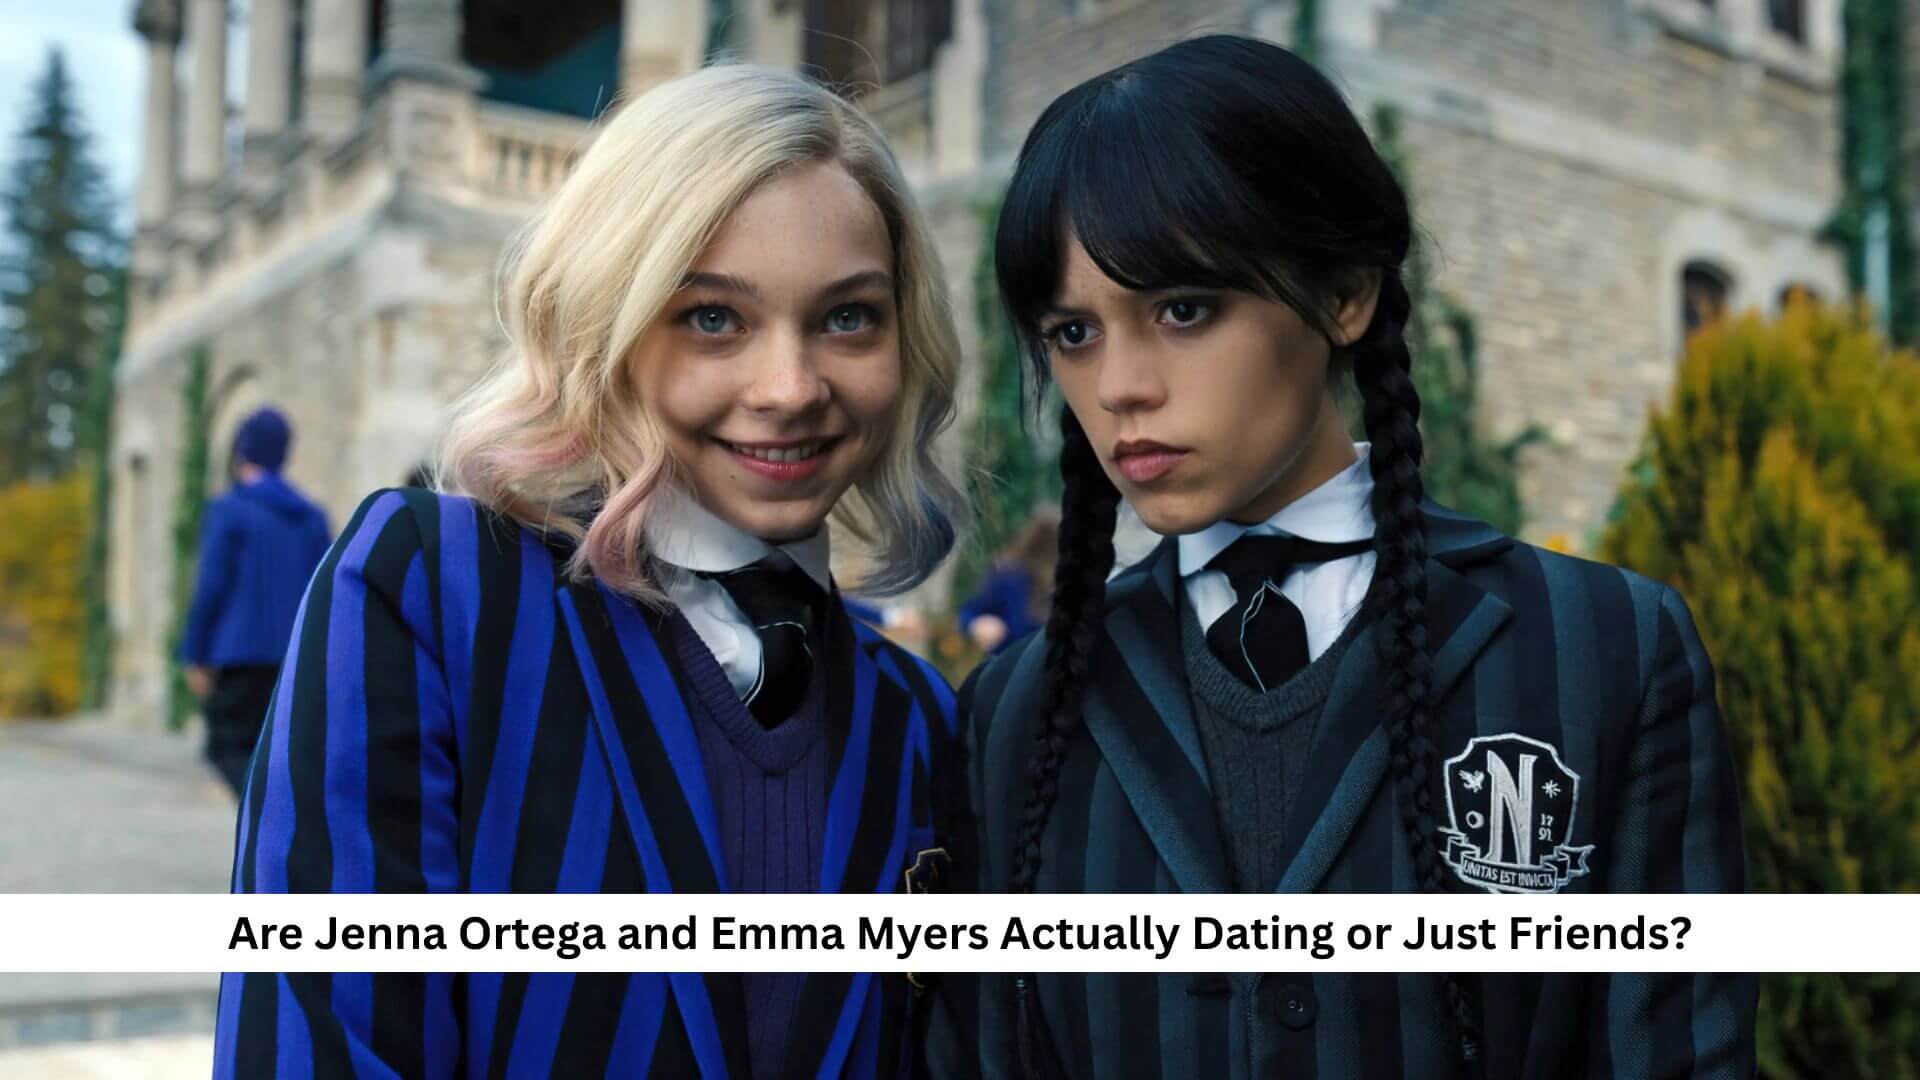 Are Jenna Ortega and Emma Myers Actually Dating or Just Friends